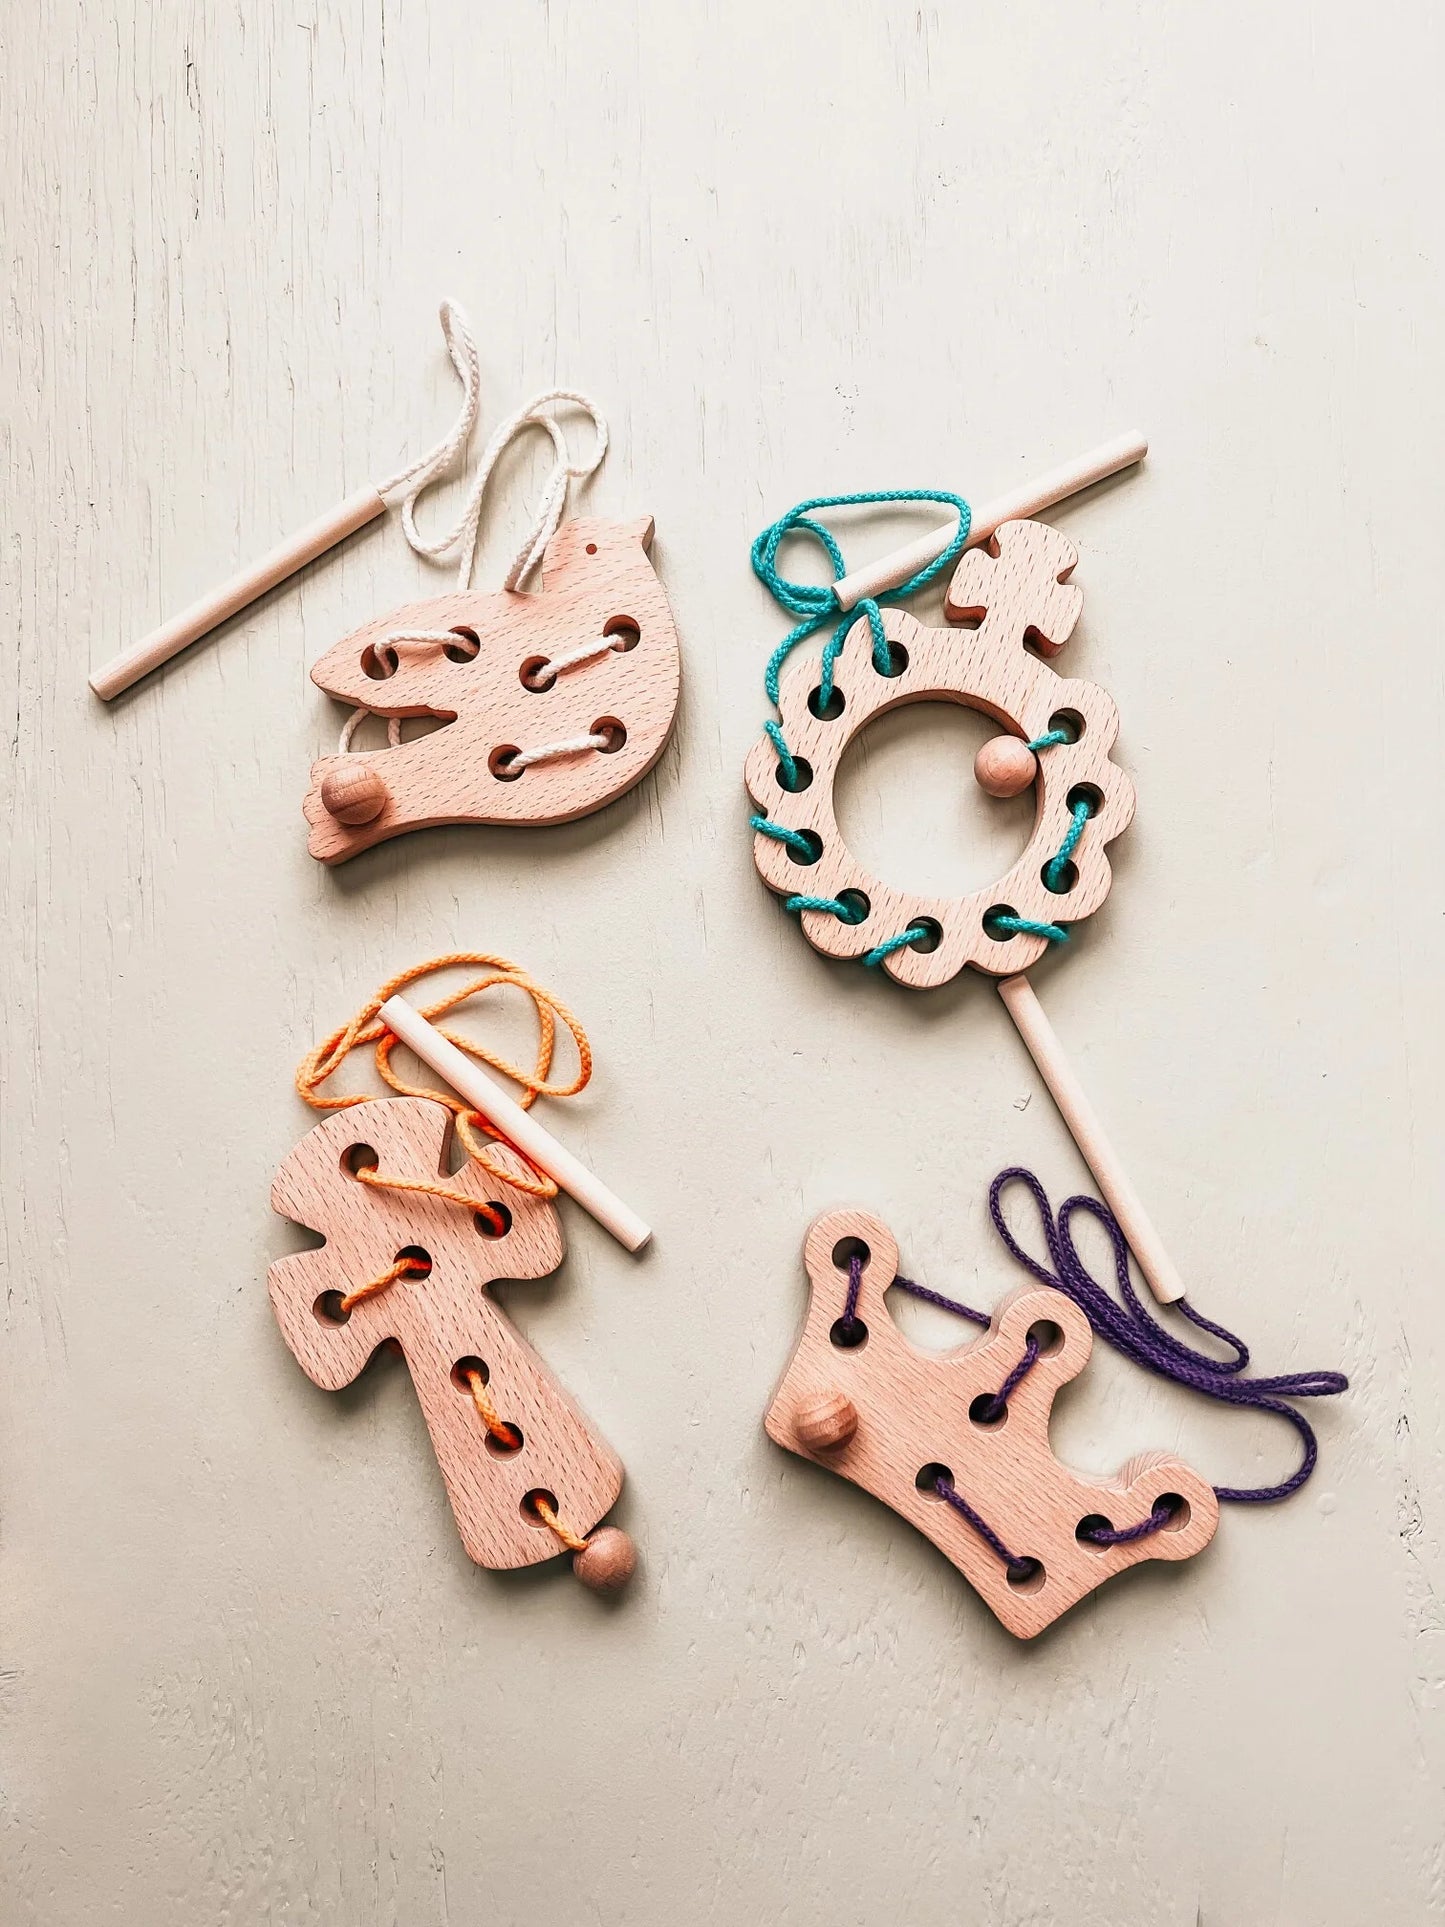 Wooden Lacing Toy - Rosary Decade